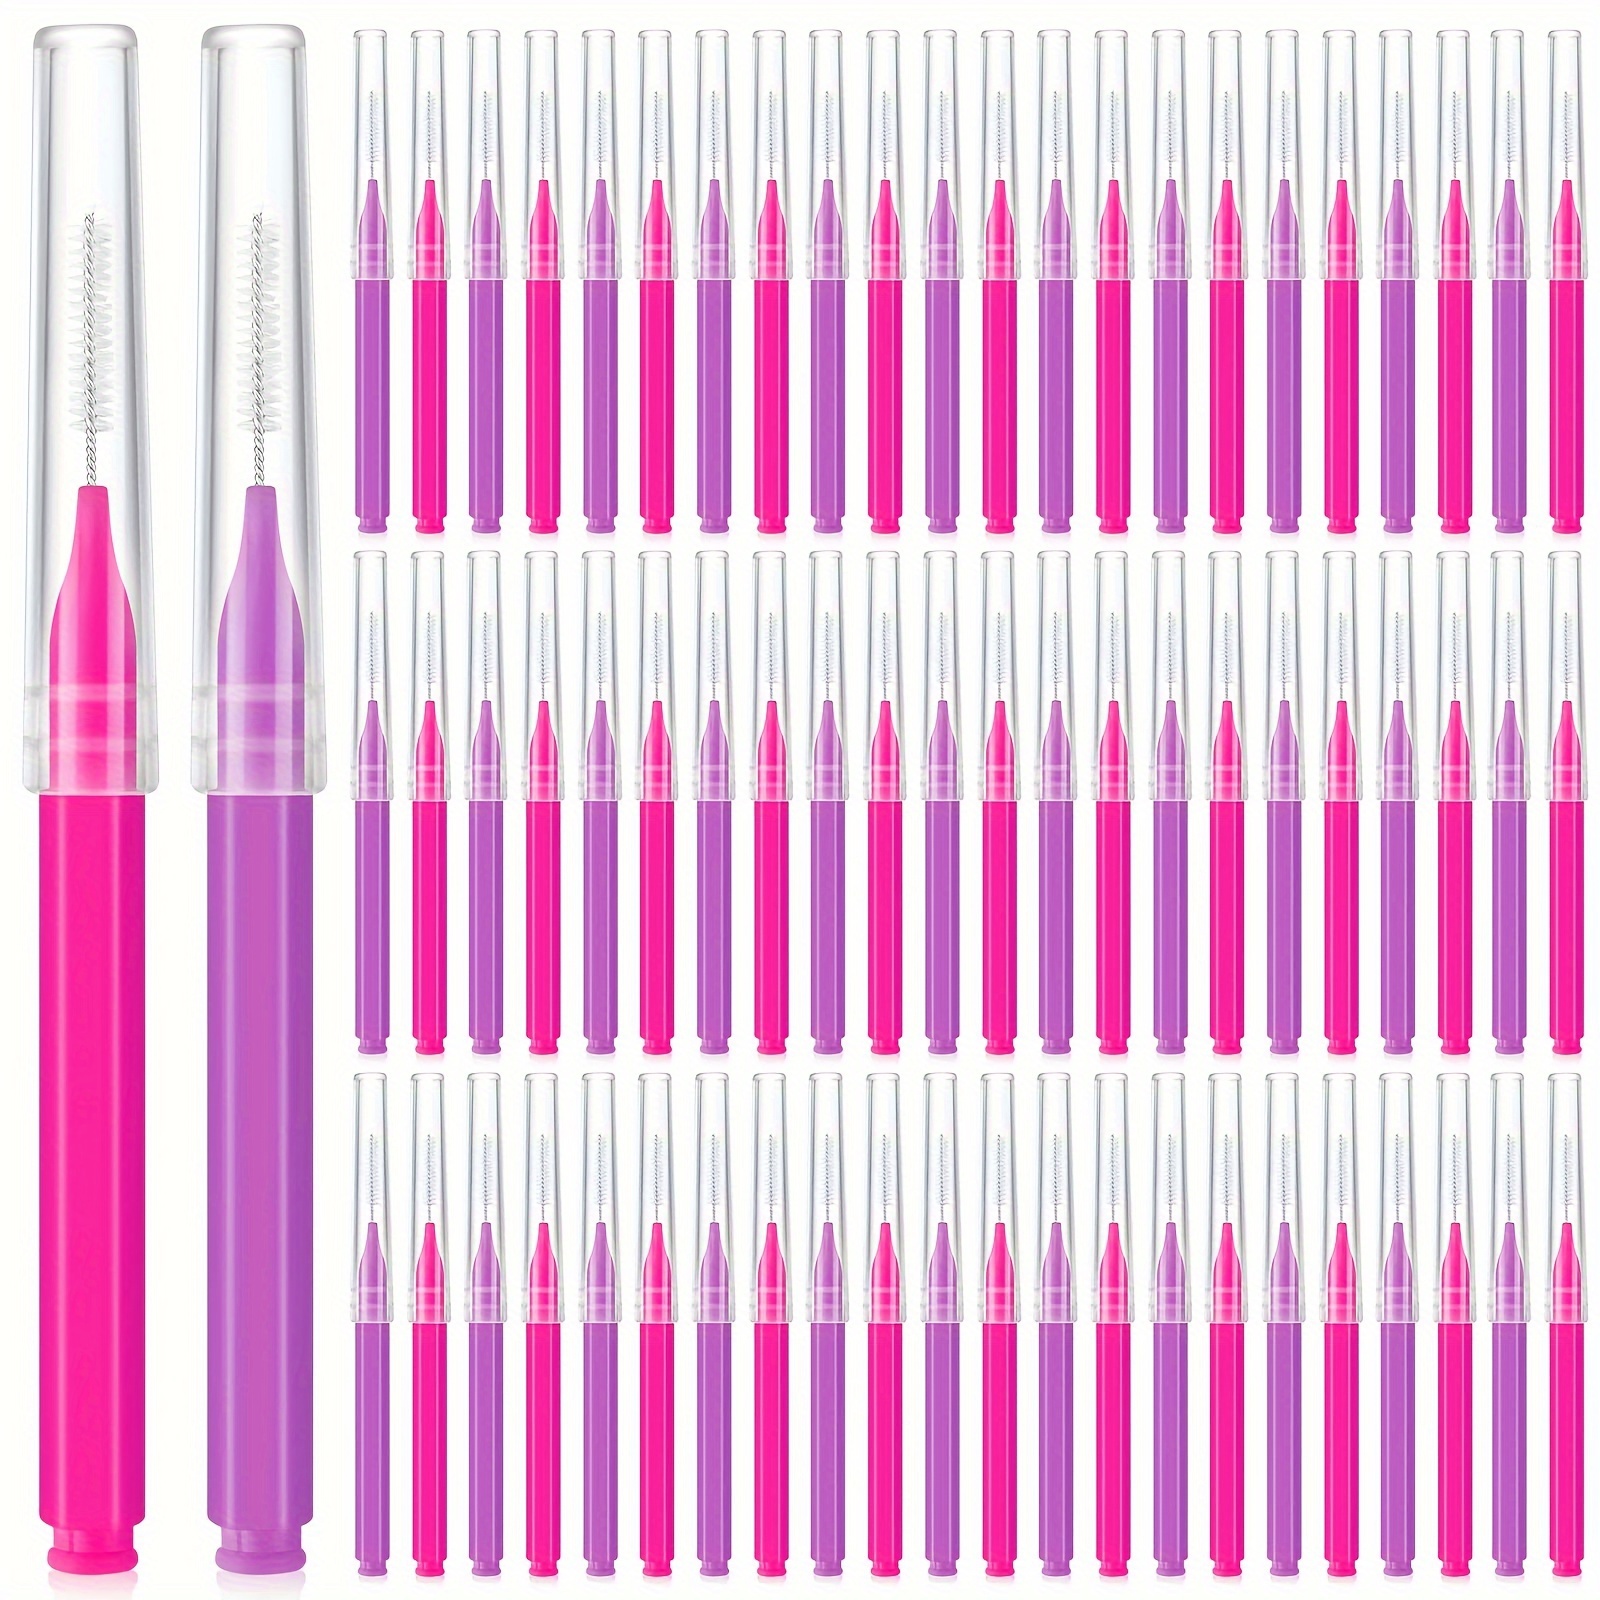 

10/20pcs Eyebrow Brushes With Caps, Eyebrow Comb Spoolie, Eyelash Separator, Eyebrow Extension Tool, Dual-ended Precision Application, Pink And Purple Brushes For Makeup And Grooming